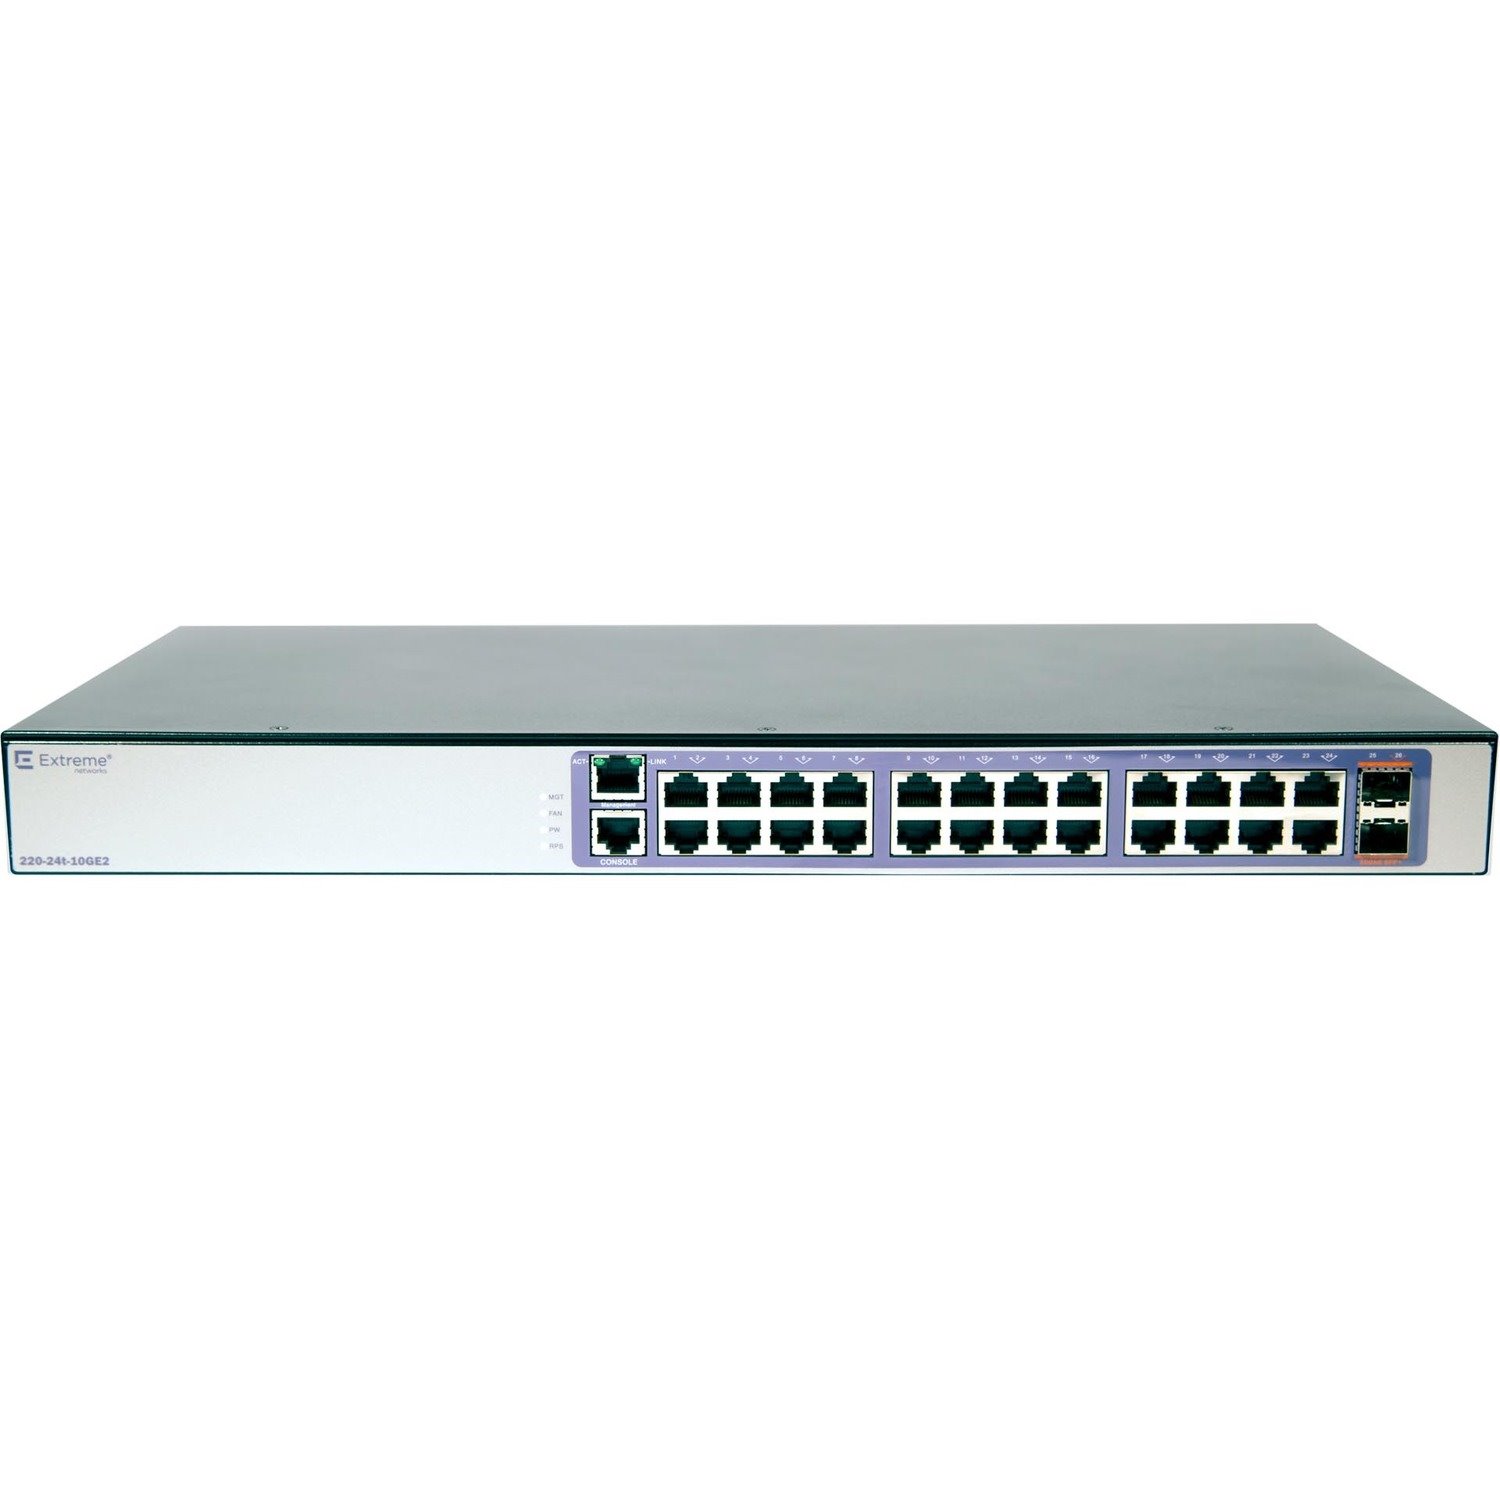 Extreme Networks 220-24t-10GE2 Layer 3 Switch